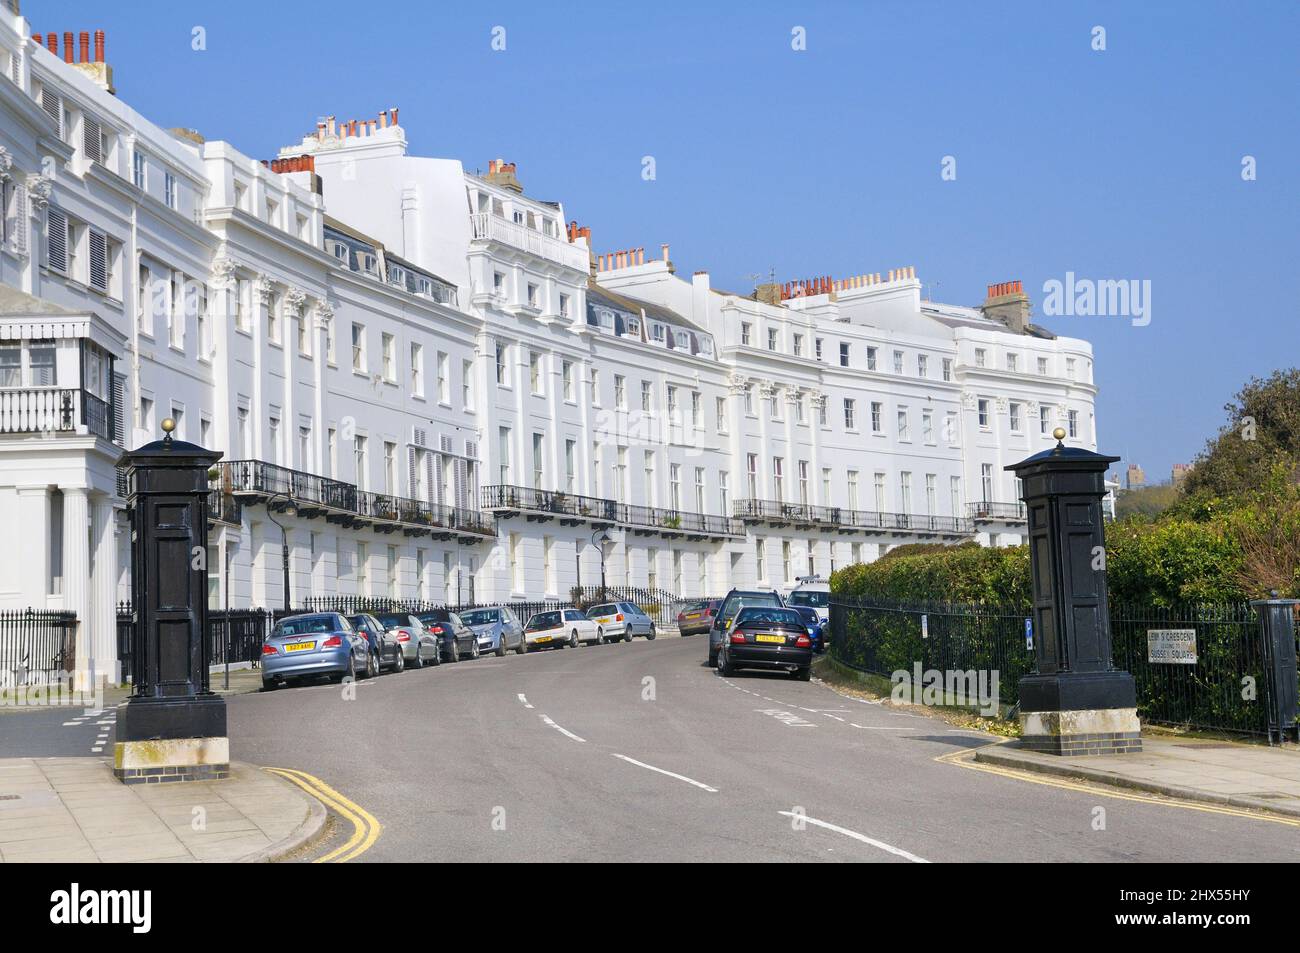 Lewes Crescent, a fine example of Grade I listed Regency architecture, Kemp Town estate, Kemptown, Brighton, East Sussex, England, UK Stock Photo